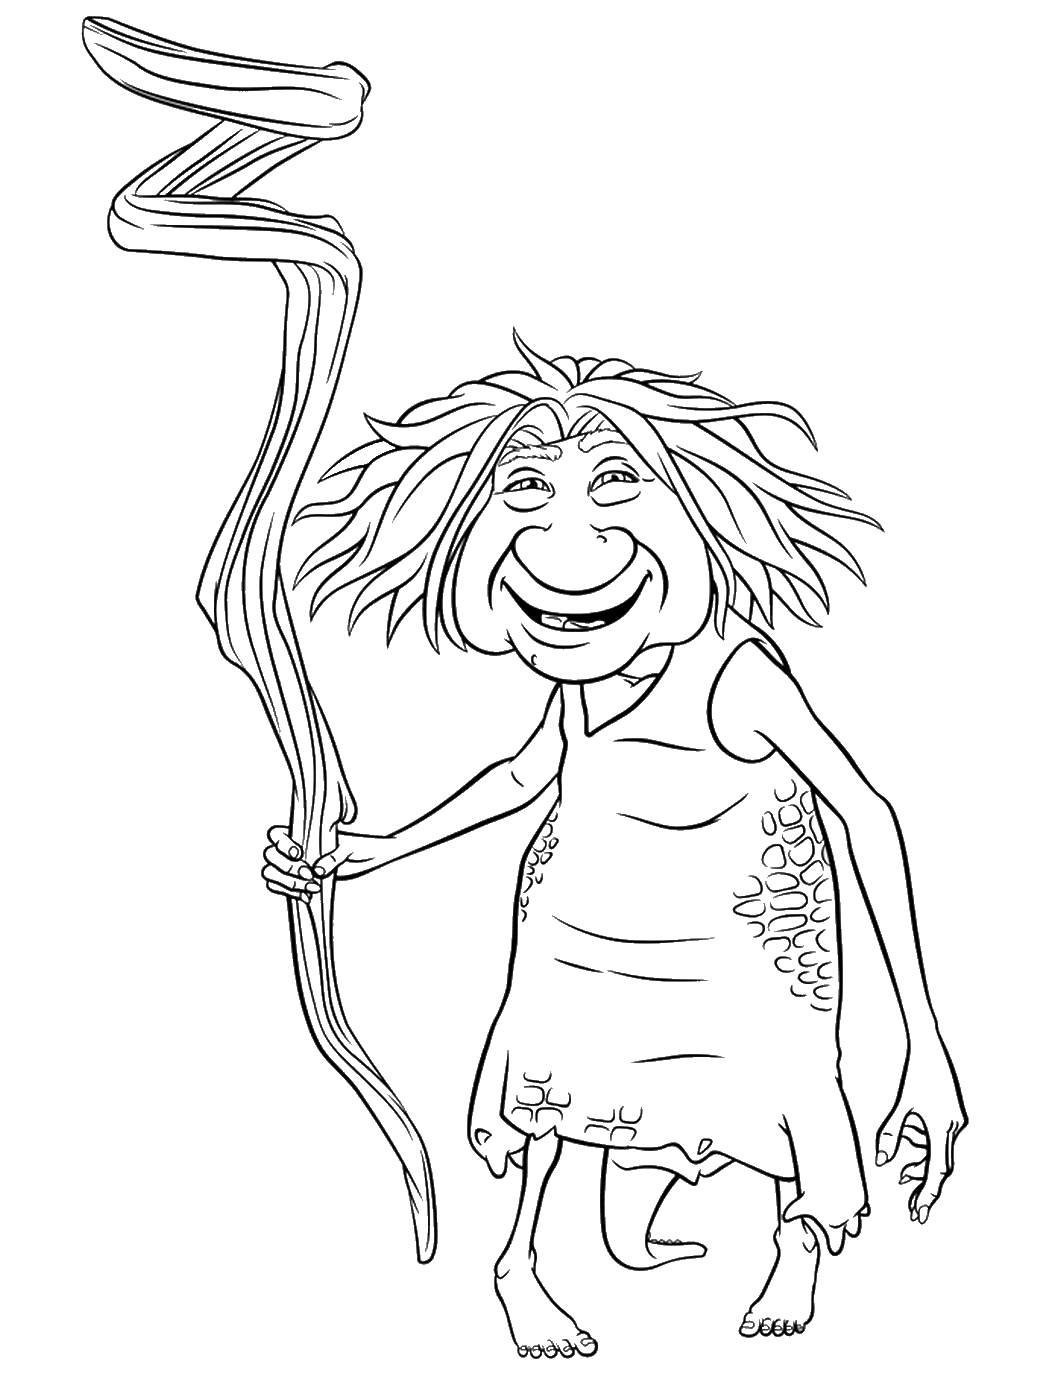 The Croods Coloring Pages TV Film croods_cl_15 Printable 2020 08584 Coloring4free